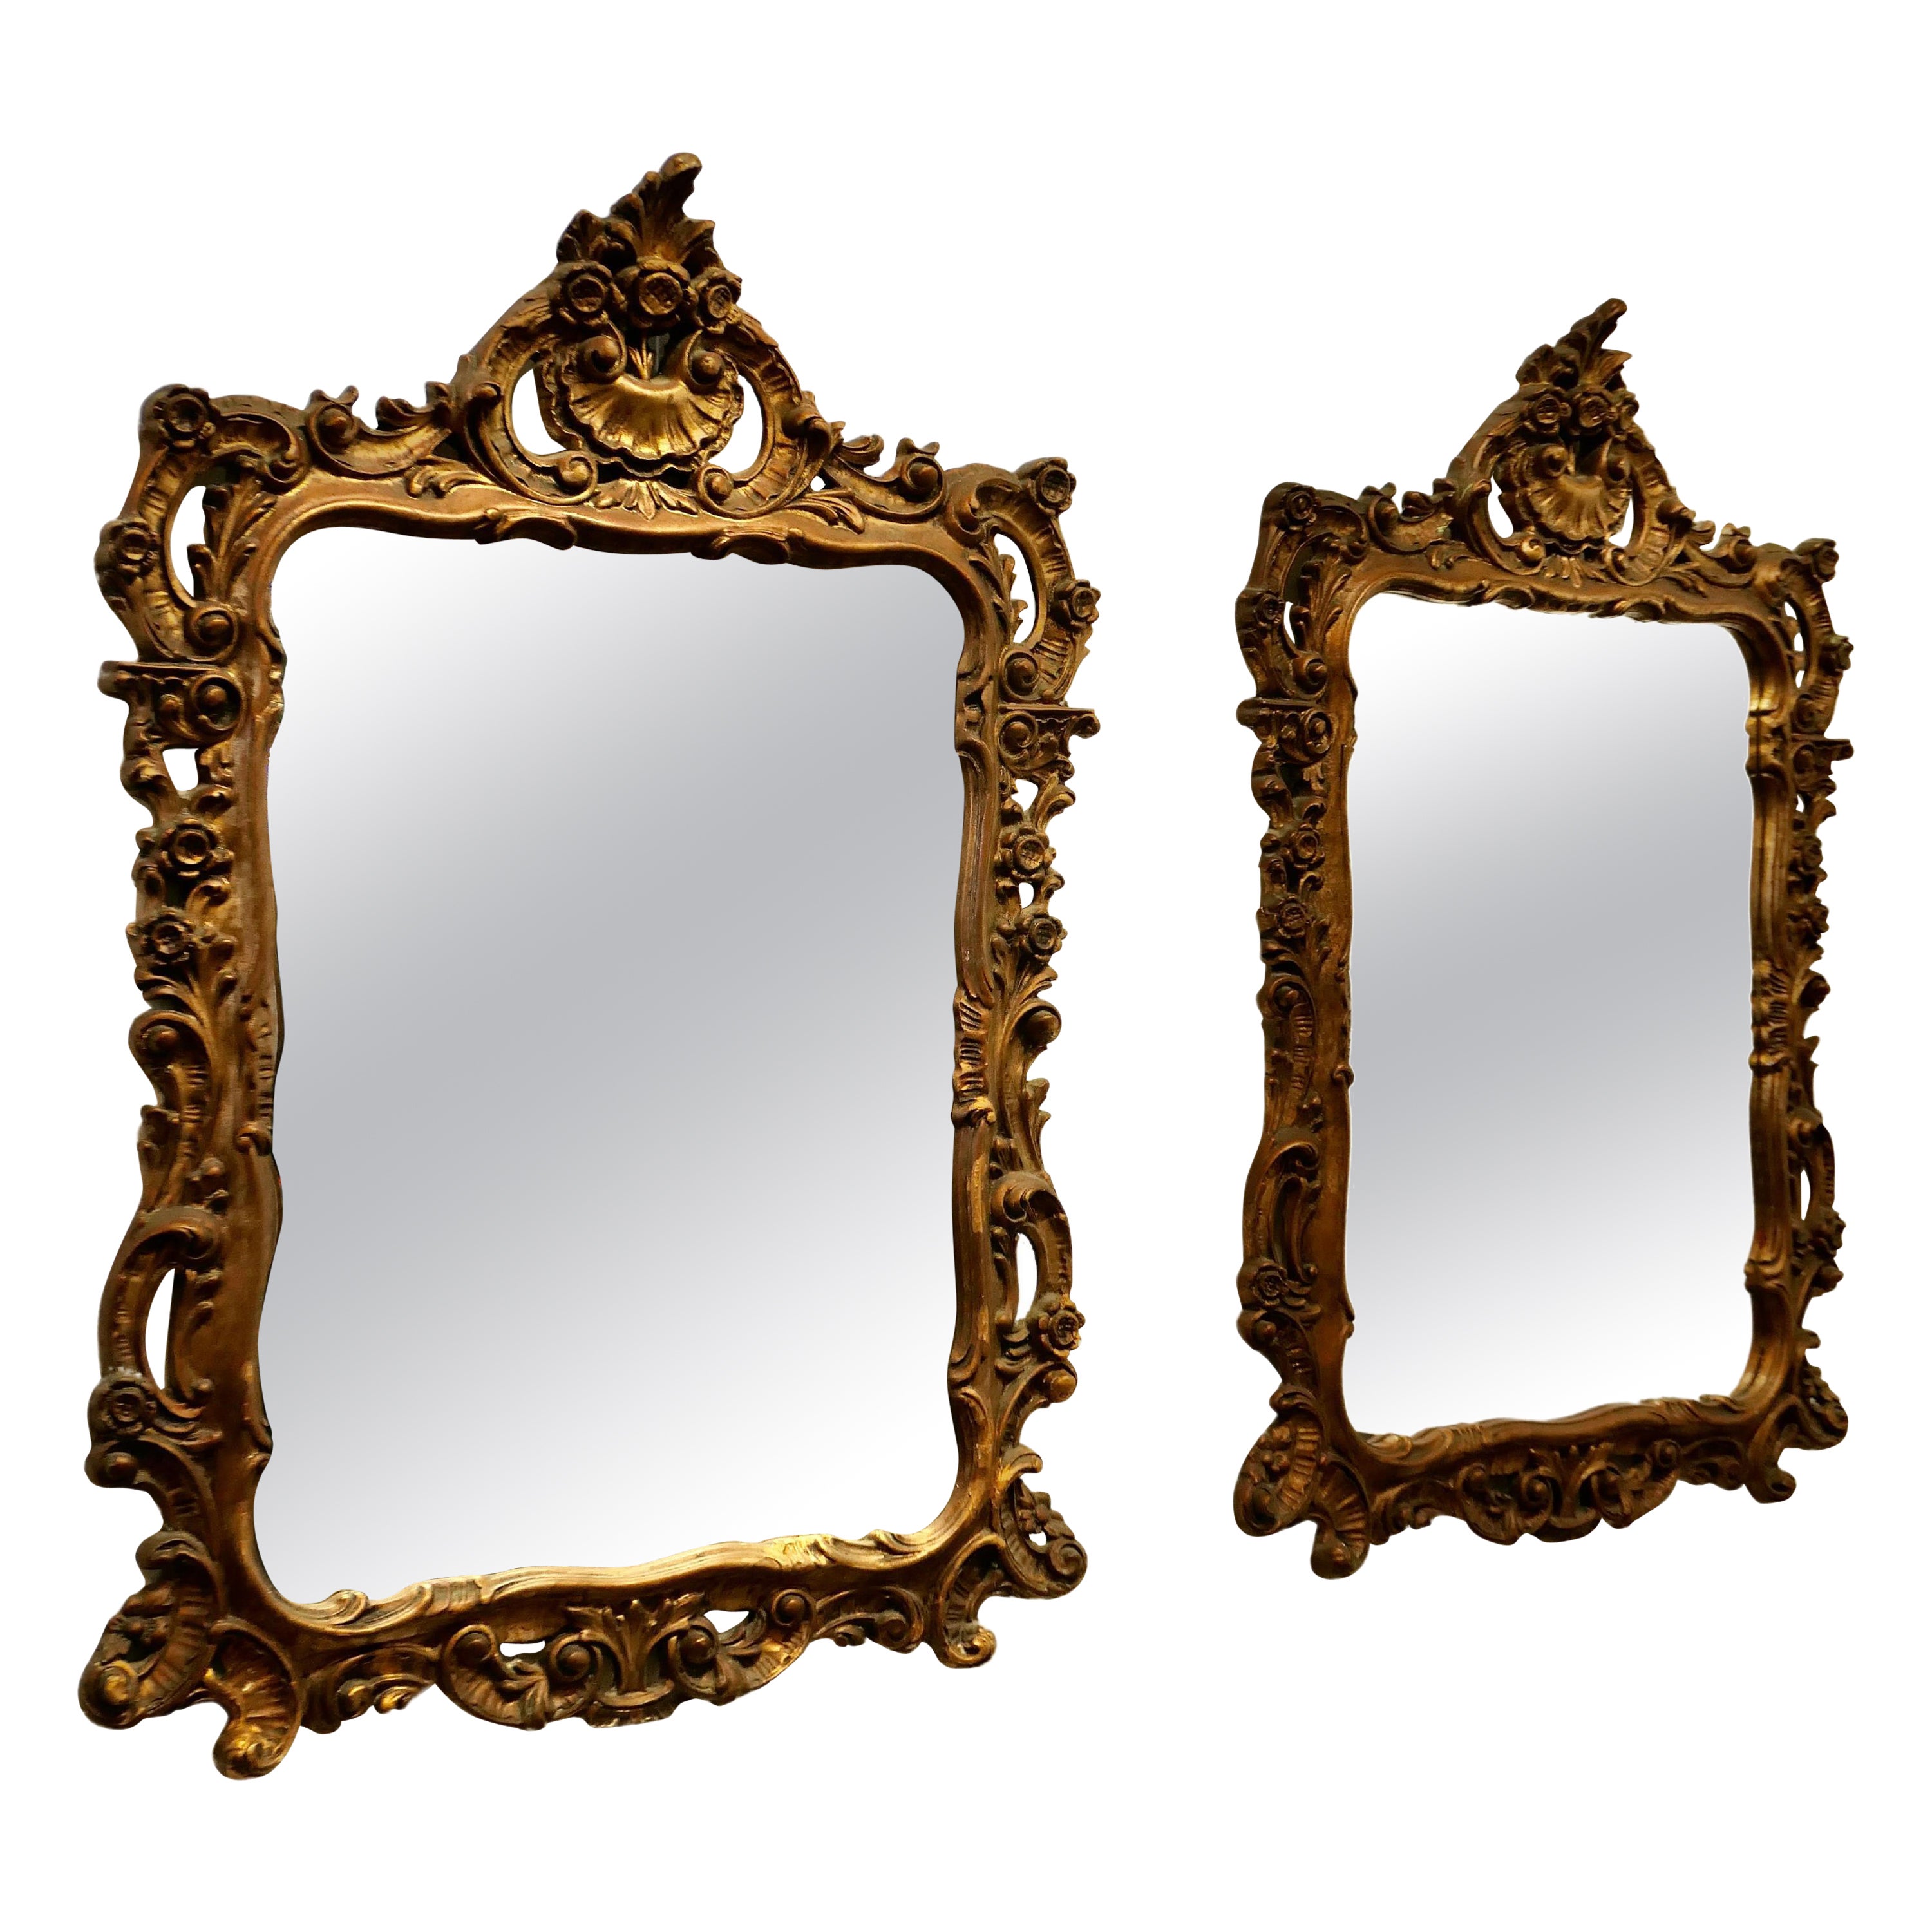 Pair of 19th Century French Gilt Mirrors For Sale